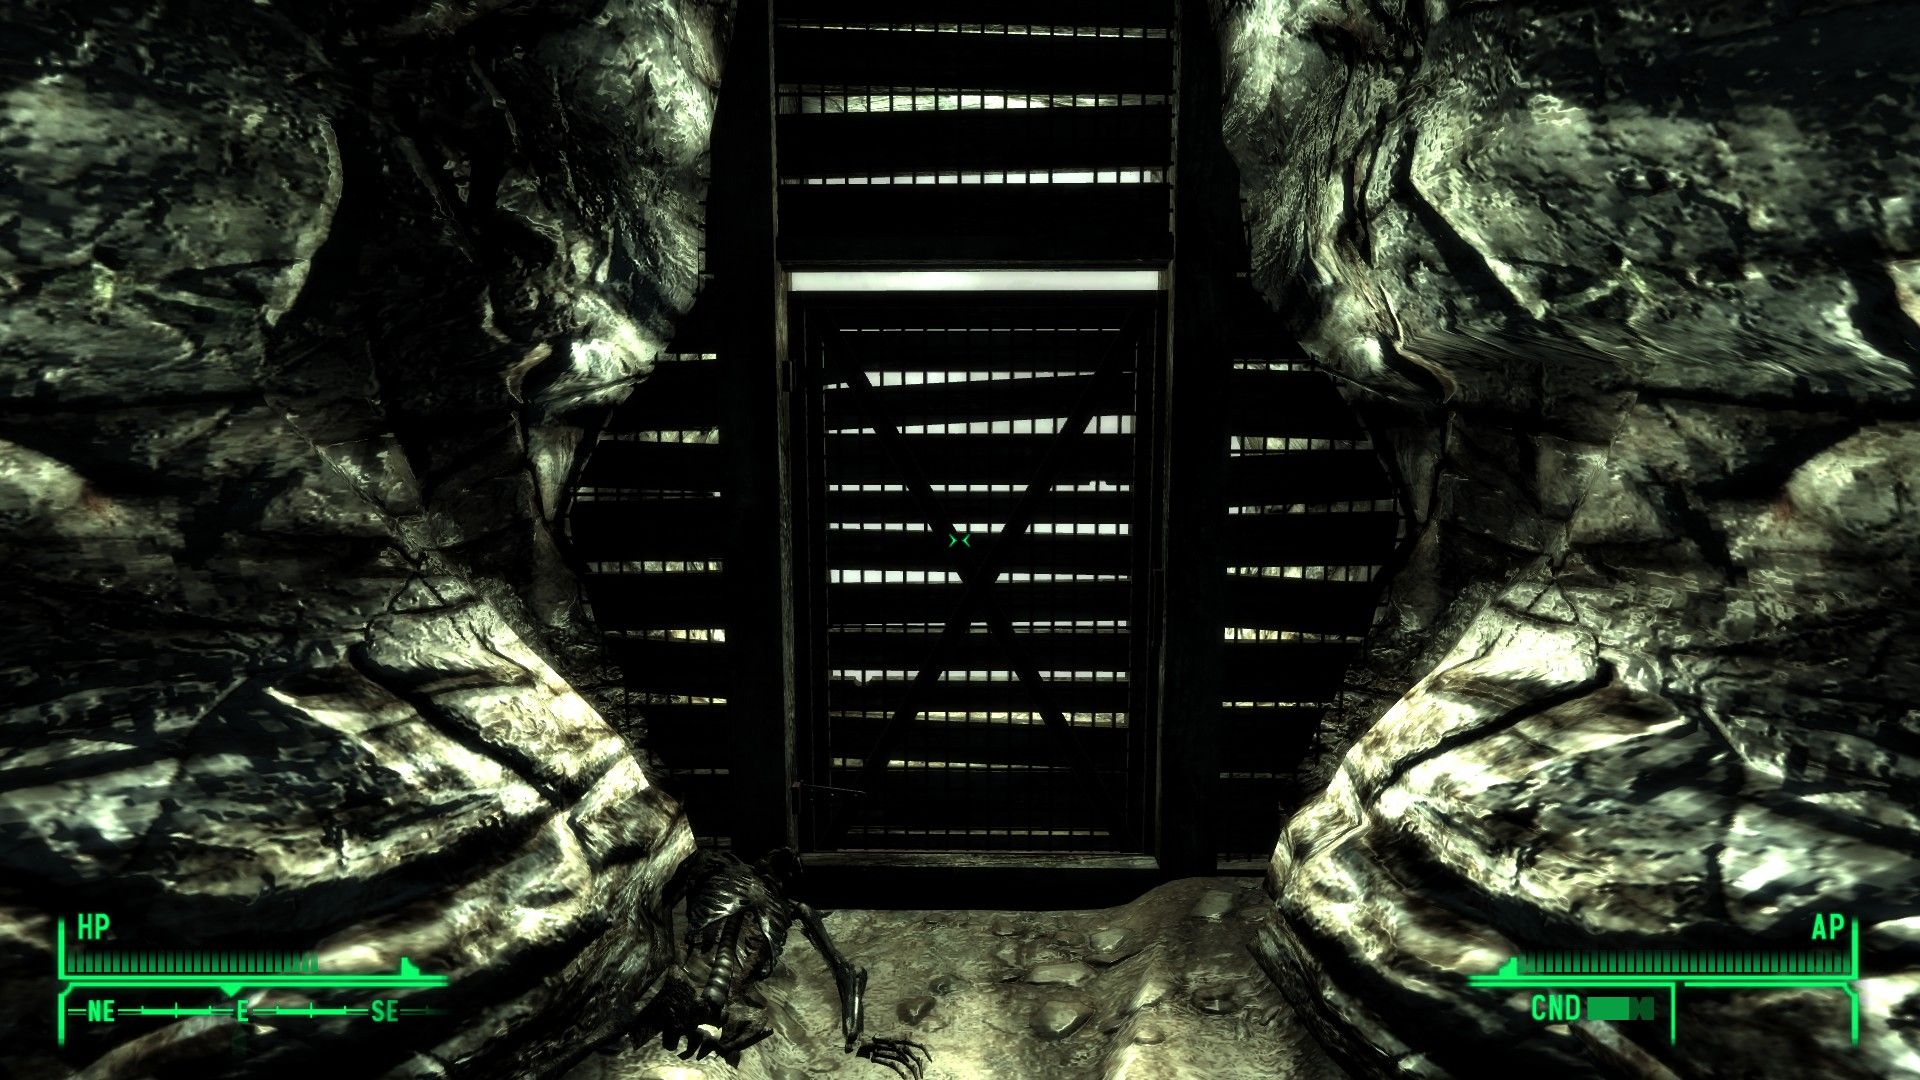 The door leading out of Vault 101 to the Capital Wasteland in Fallout 3